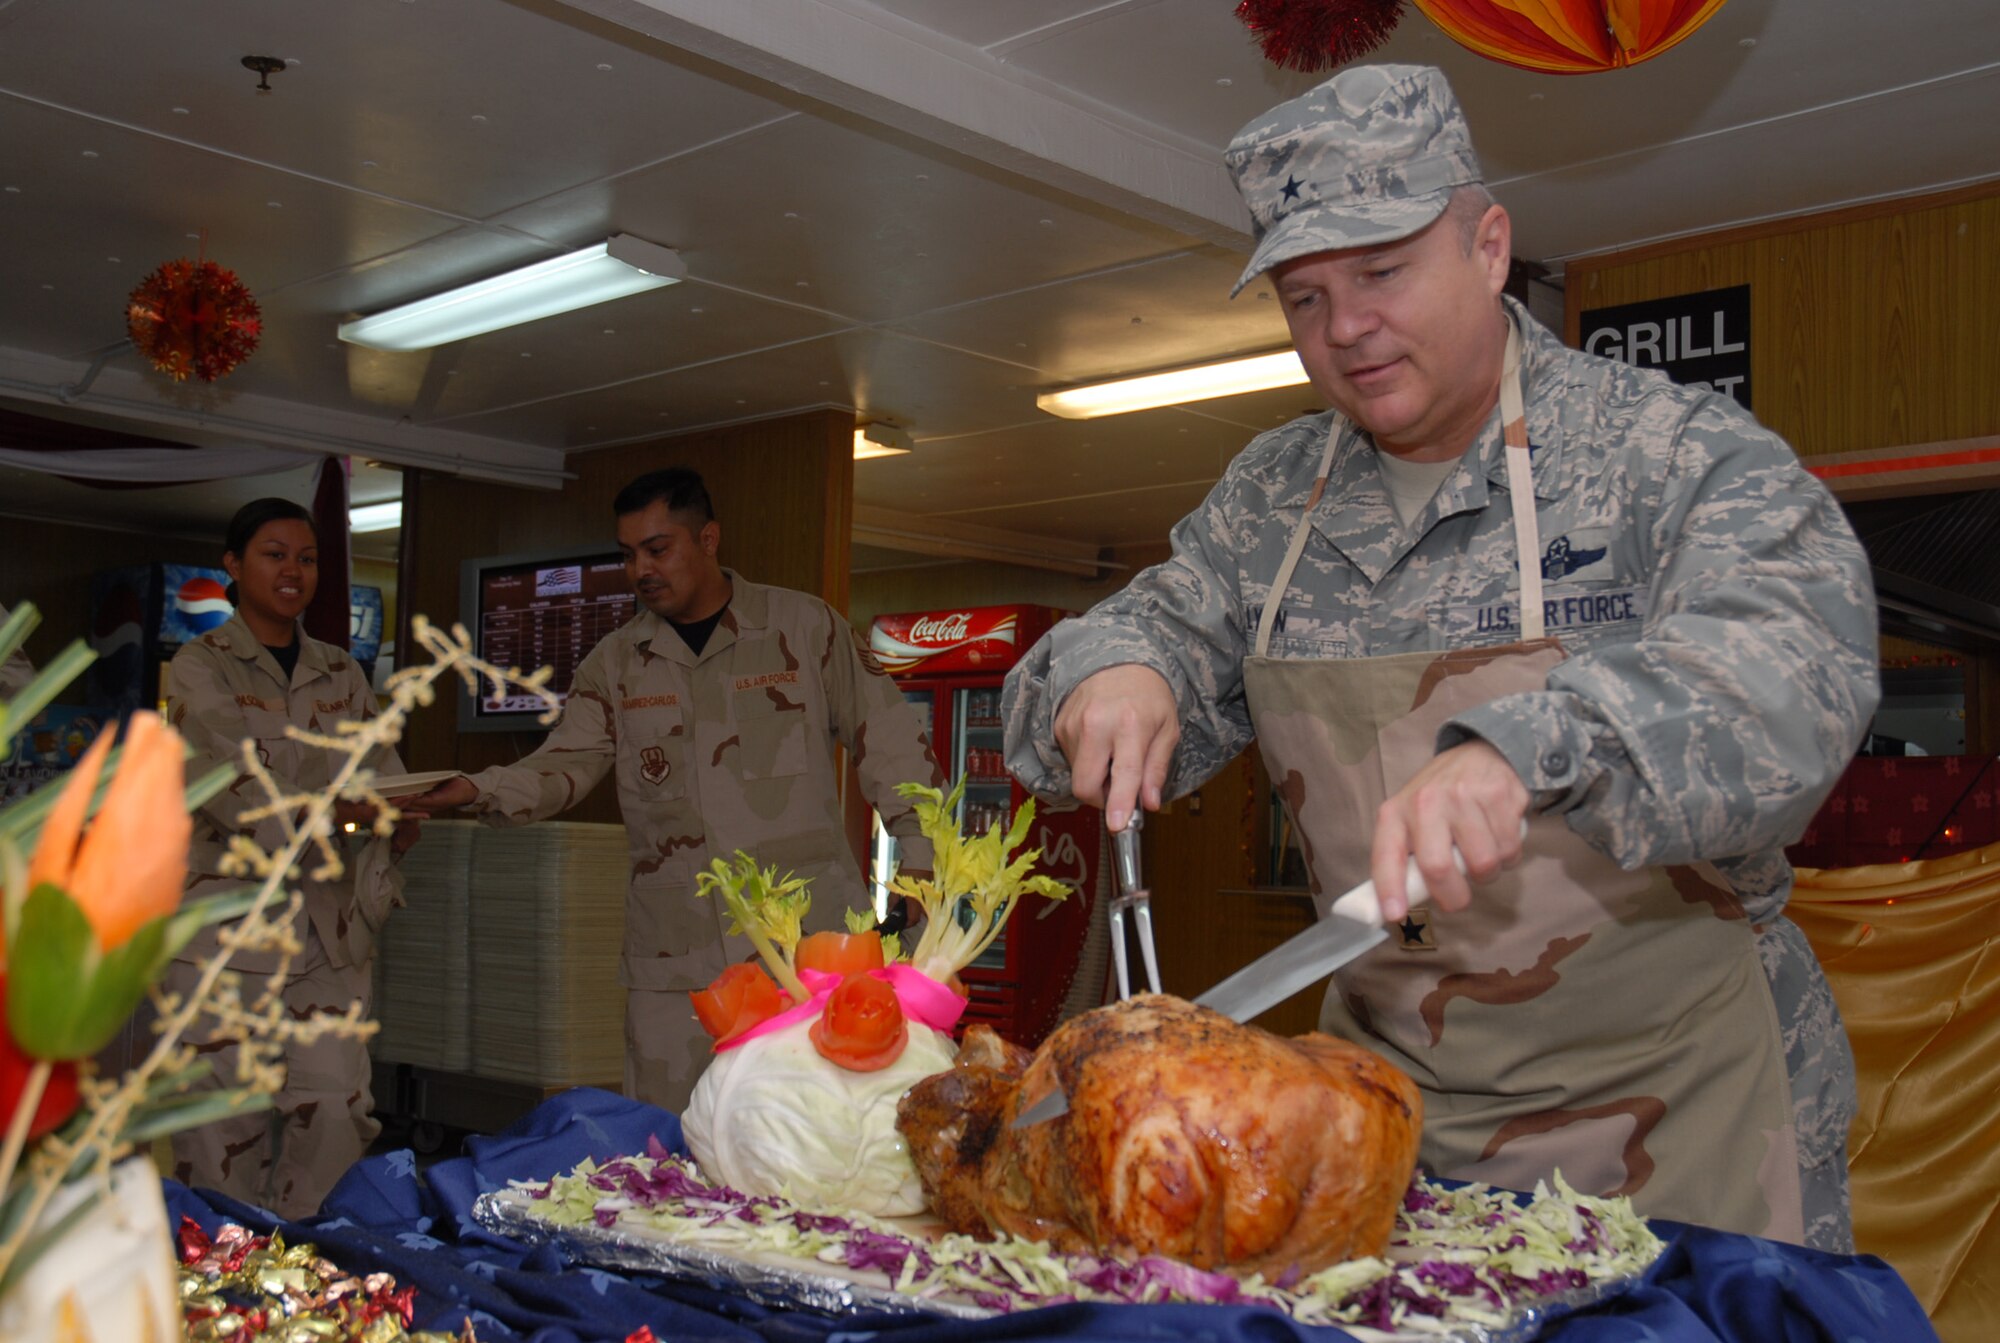 SOUTHWEST ASIA - Brig. Gen.Charlie Lyon, 379th Air Expeditionary Wing commander, makes the first cut on the Thanksgiving Day turkey at the Independence Dining Facility Nov. 22 at a Southwest Asia air base. (U. S. Air Force photo/Staff Sgt. Douglas Olsen)